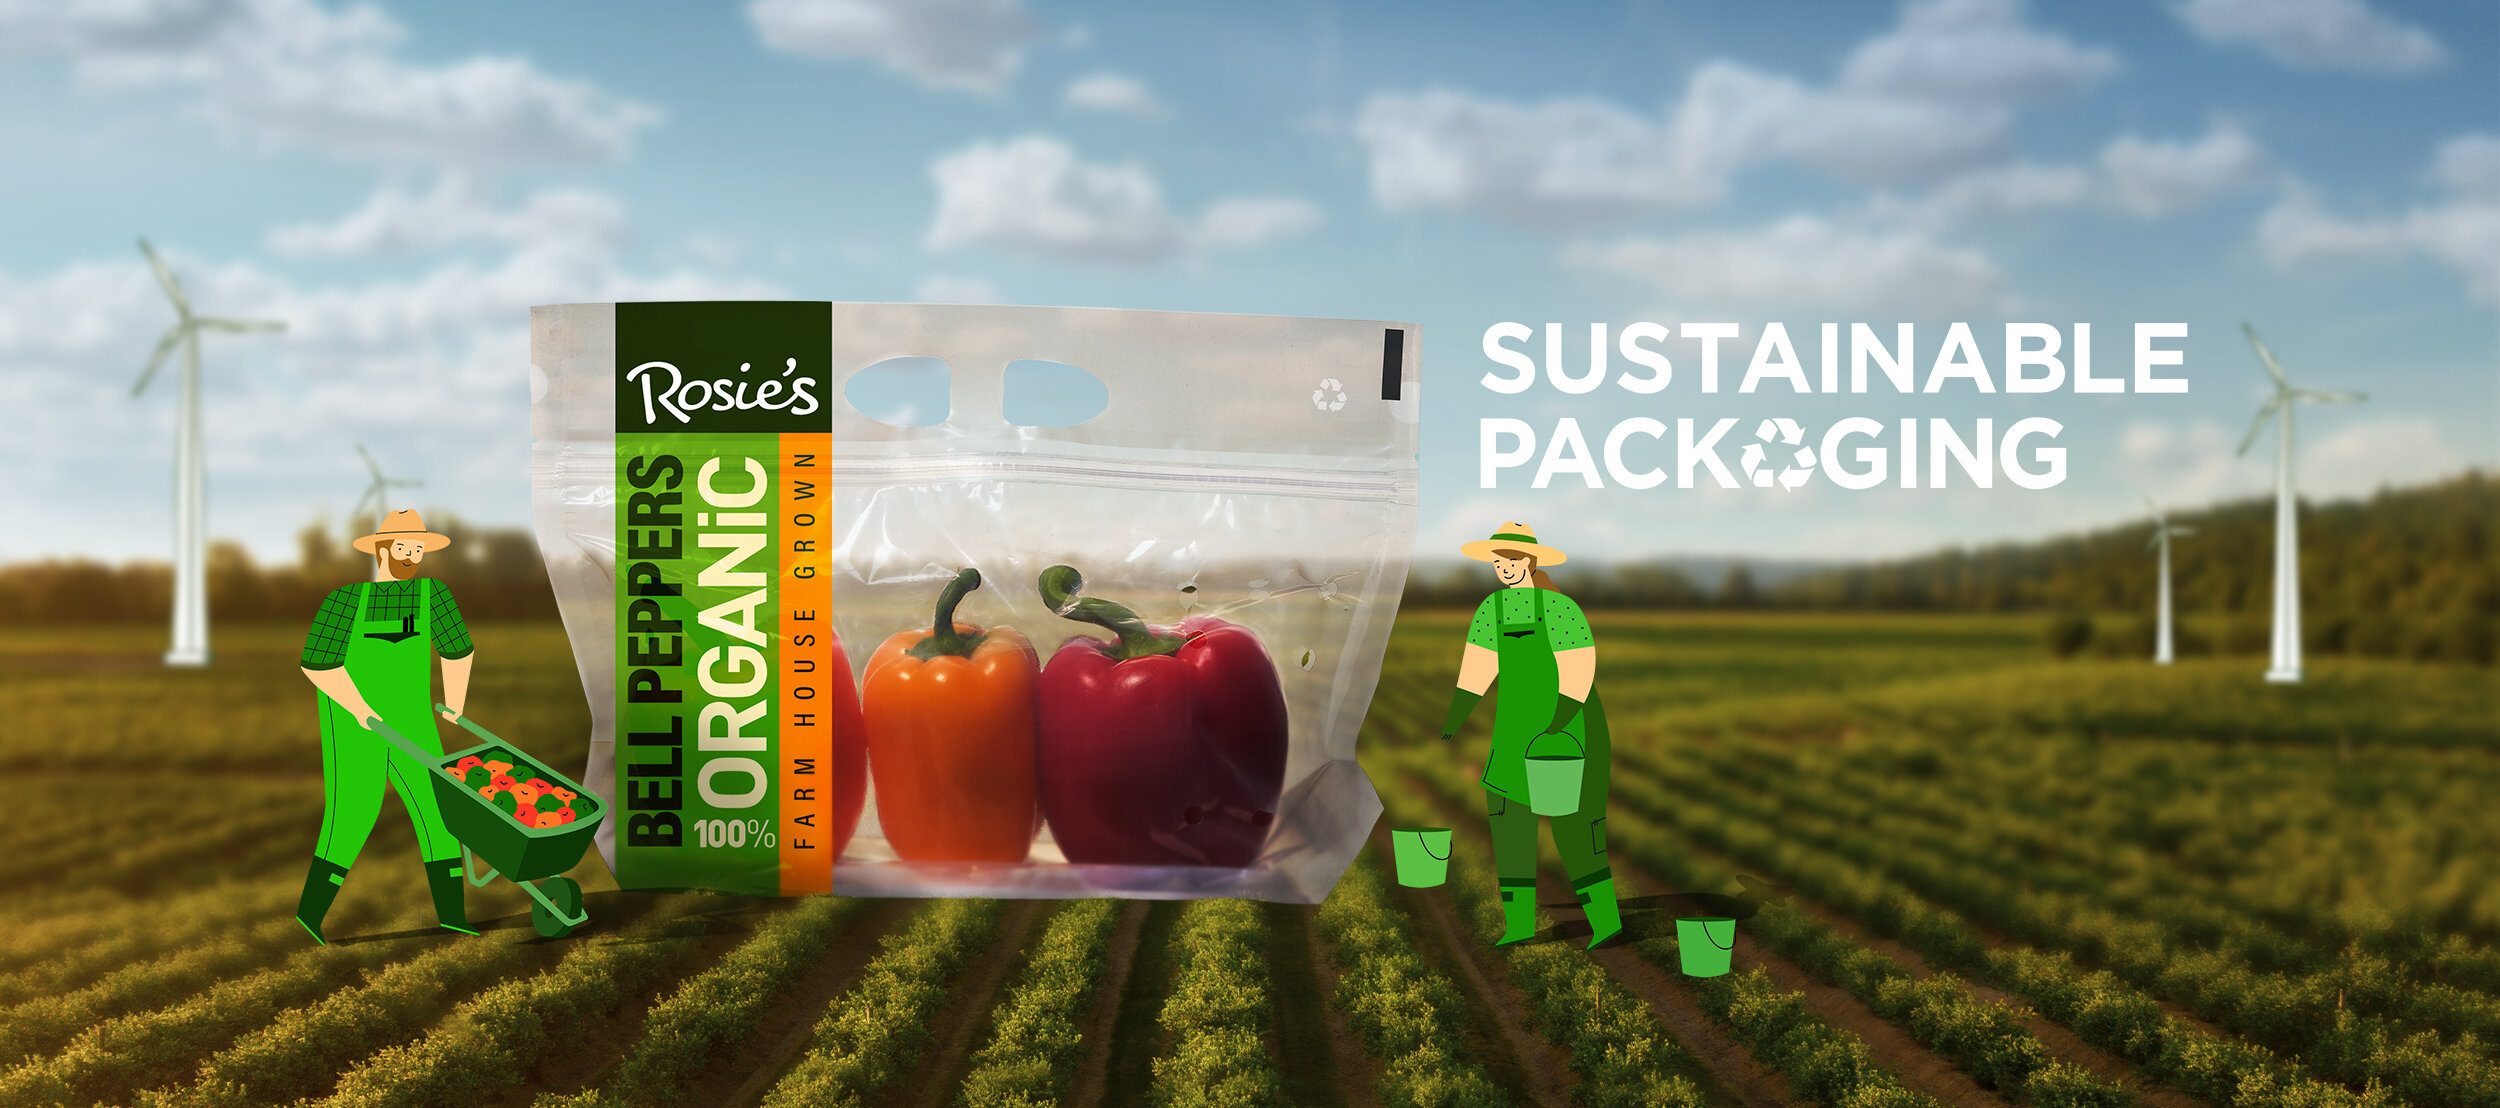 Package of Rosie's Organic Bell peppres product with caption reading "Sustainable Packaging". Package is placed on the farm field dropdown with couple illustrated farmers characters next to it. 